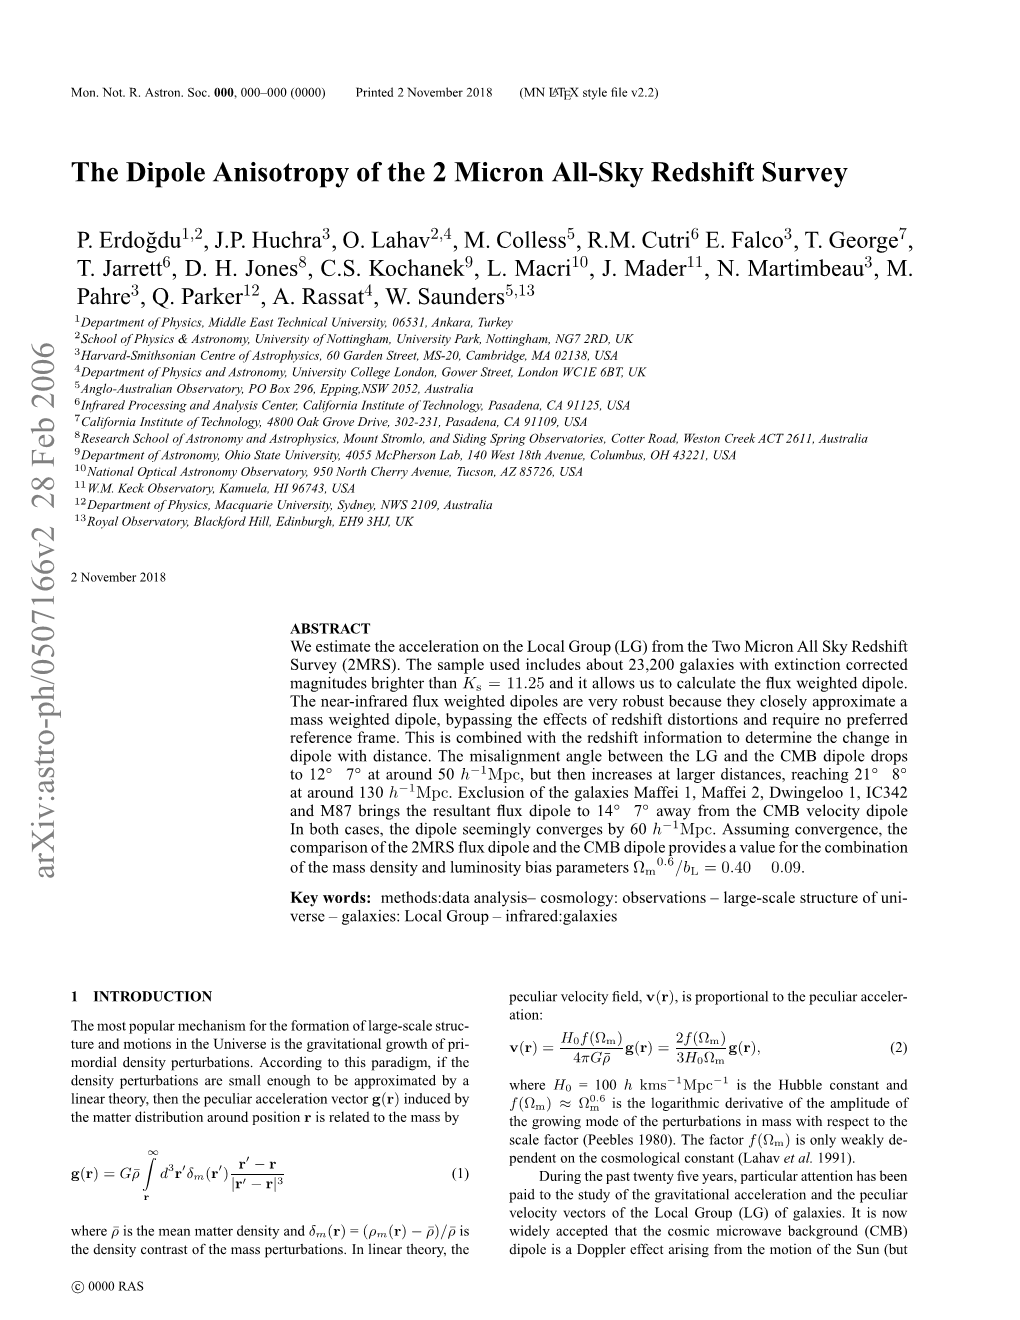 The Dipole Anisotropy of the 2 Micron All-Sky Redshift Survey 3